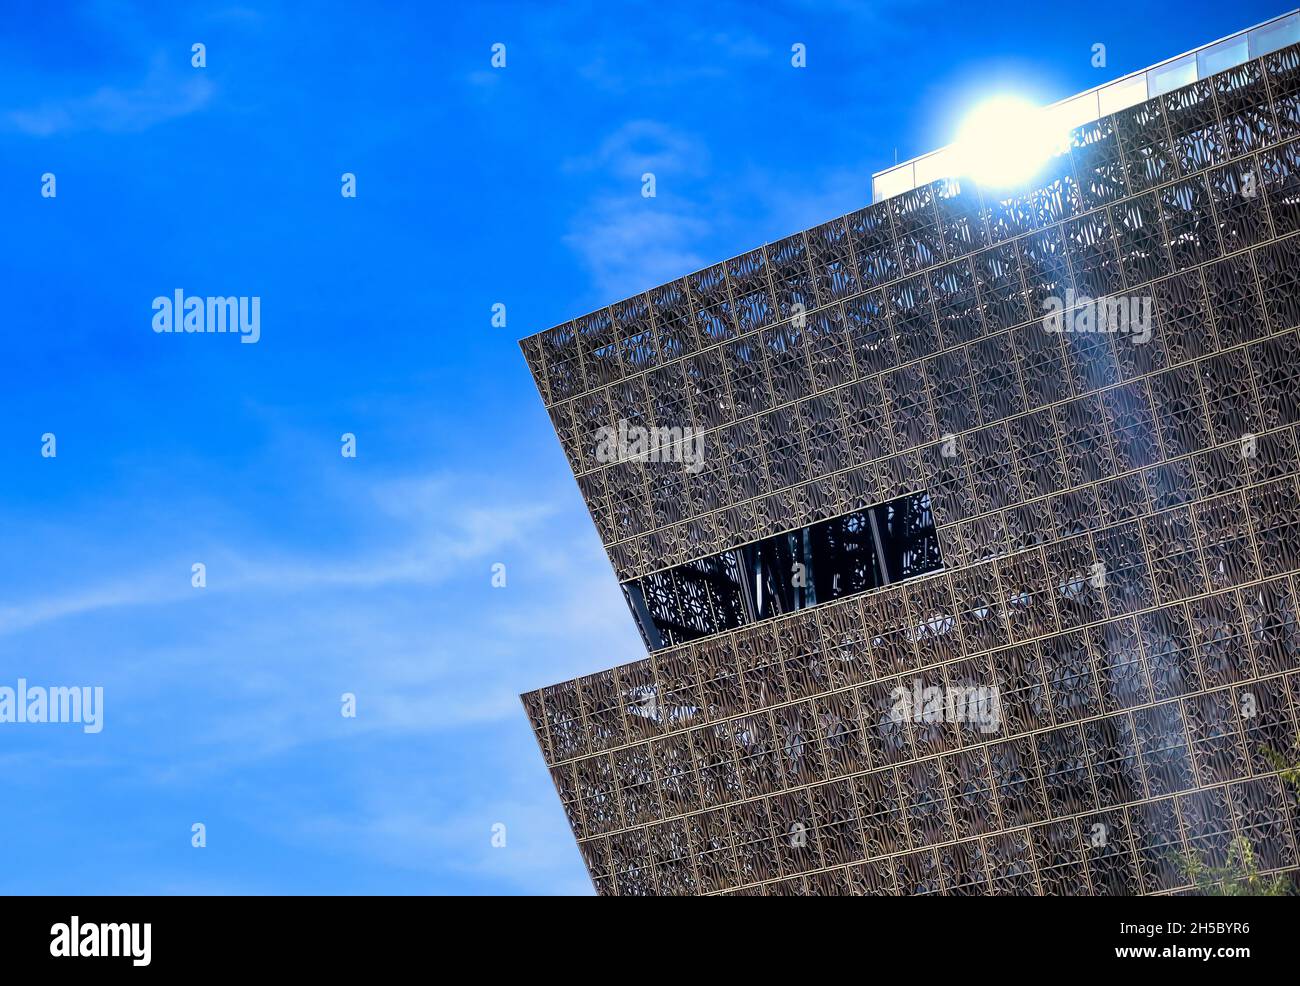 Washington, D.C. - October 14th, 2021: The Smithsonian's National Museum of African American History and Culture on the National Mall. Stock Photo